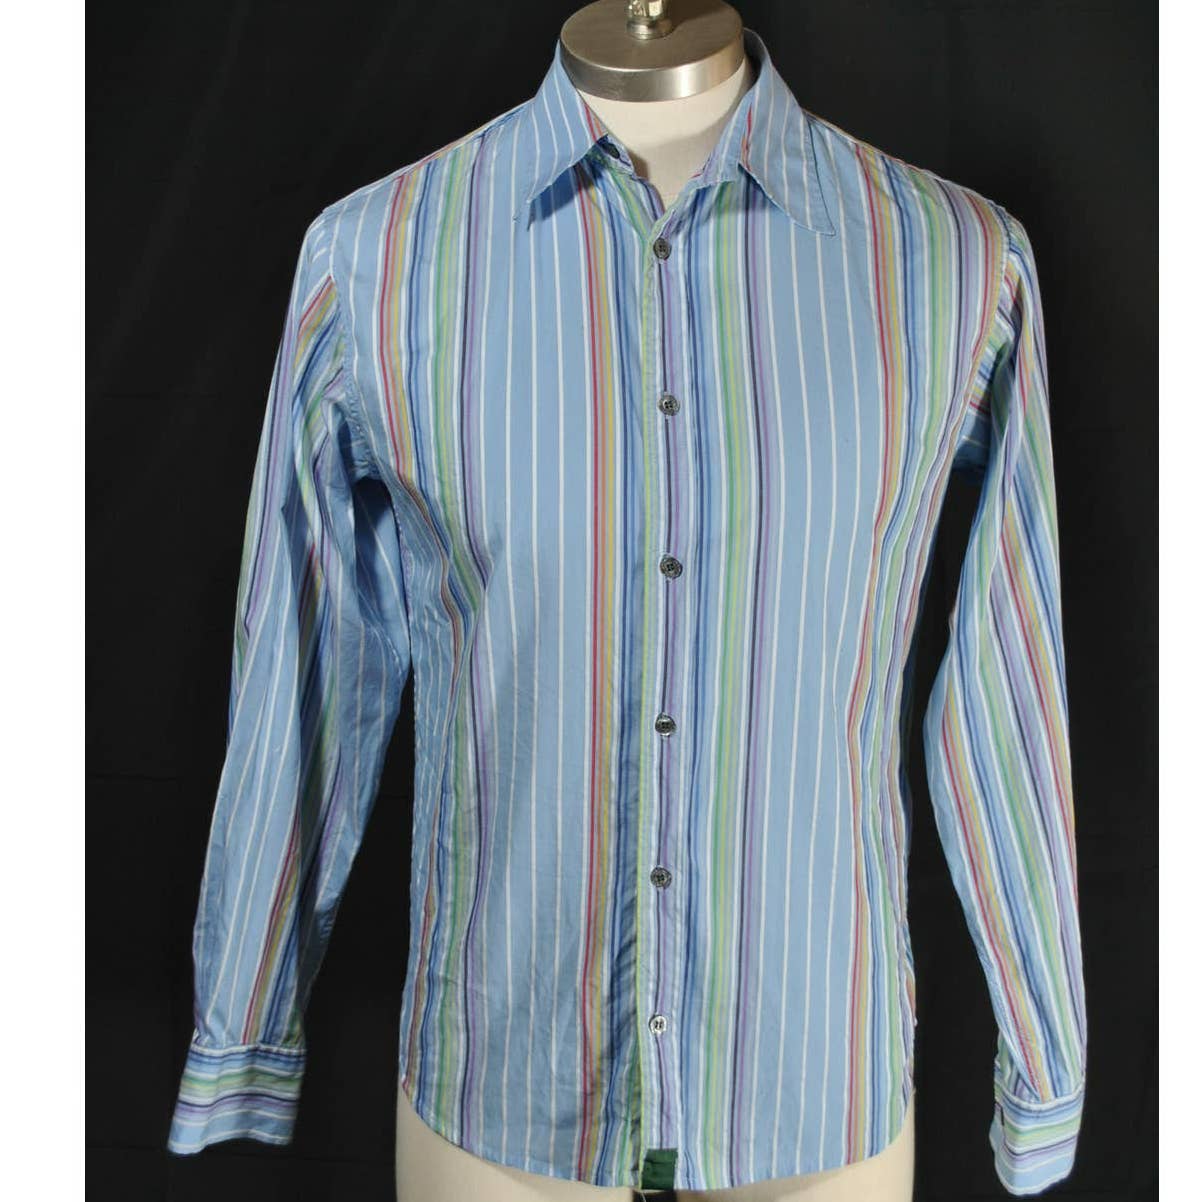 Paul Smith Jeans Blue Striped Button Up Shirt - S